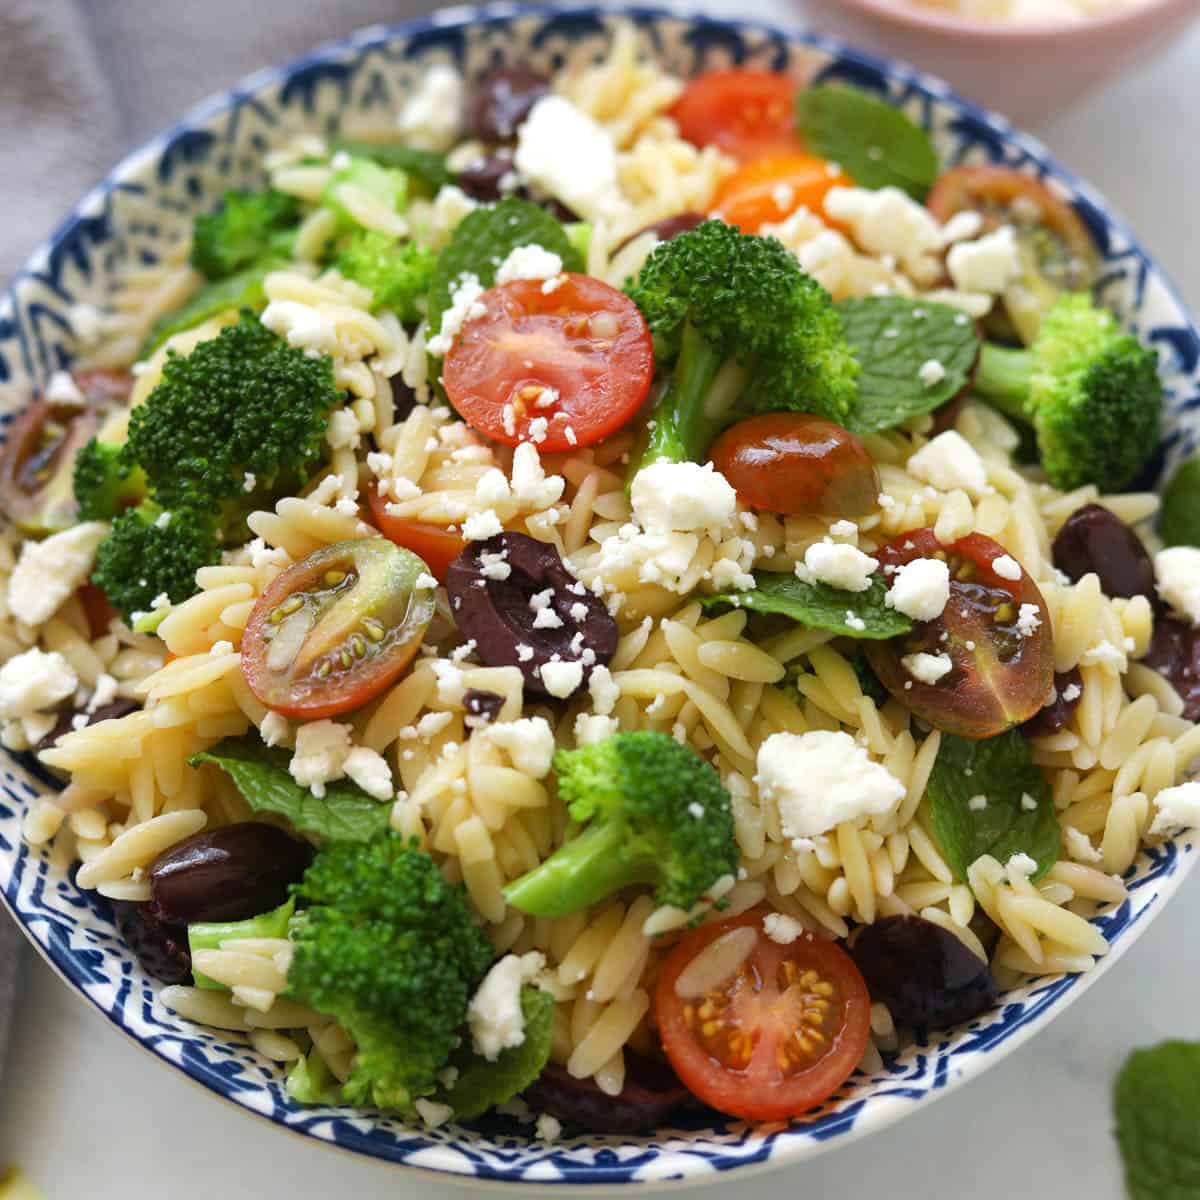 Orzo pasta with vegetables in a bowl.